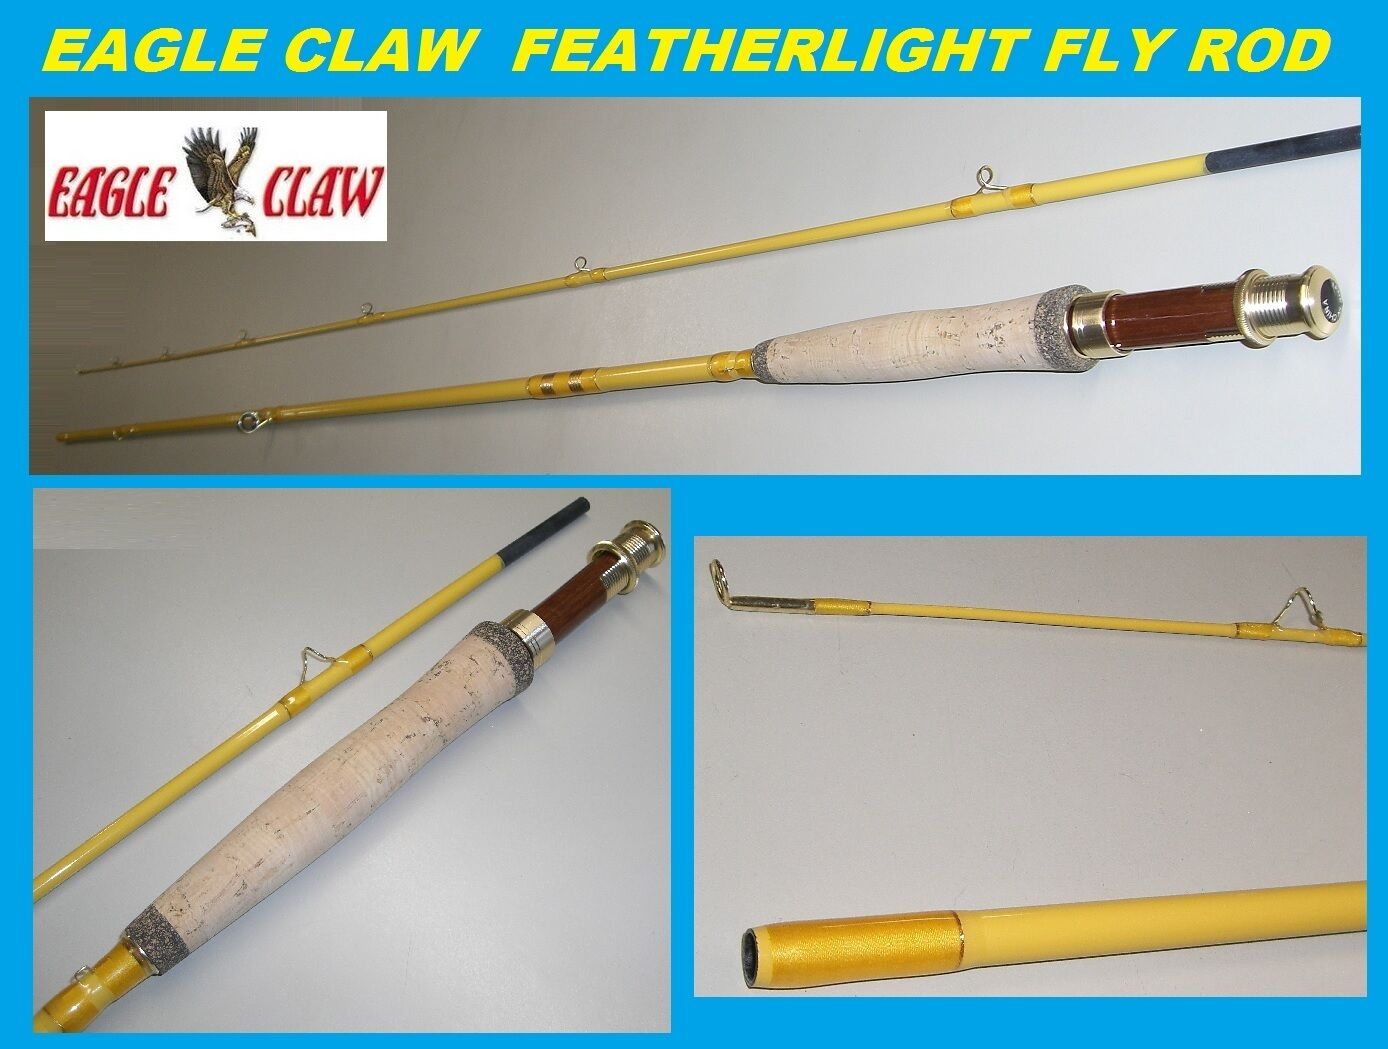 Eagle Claw Featherlight 4 Line Weight Fly Rod, 2 Piece (yellow, 7') #fl300-7